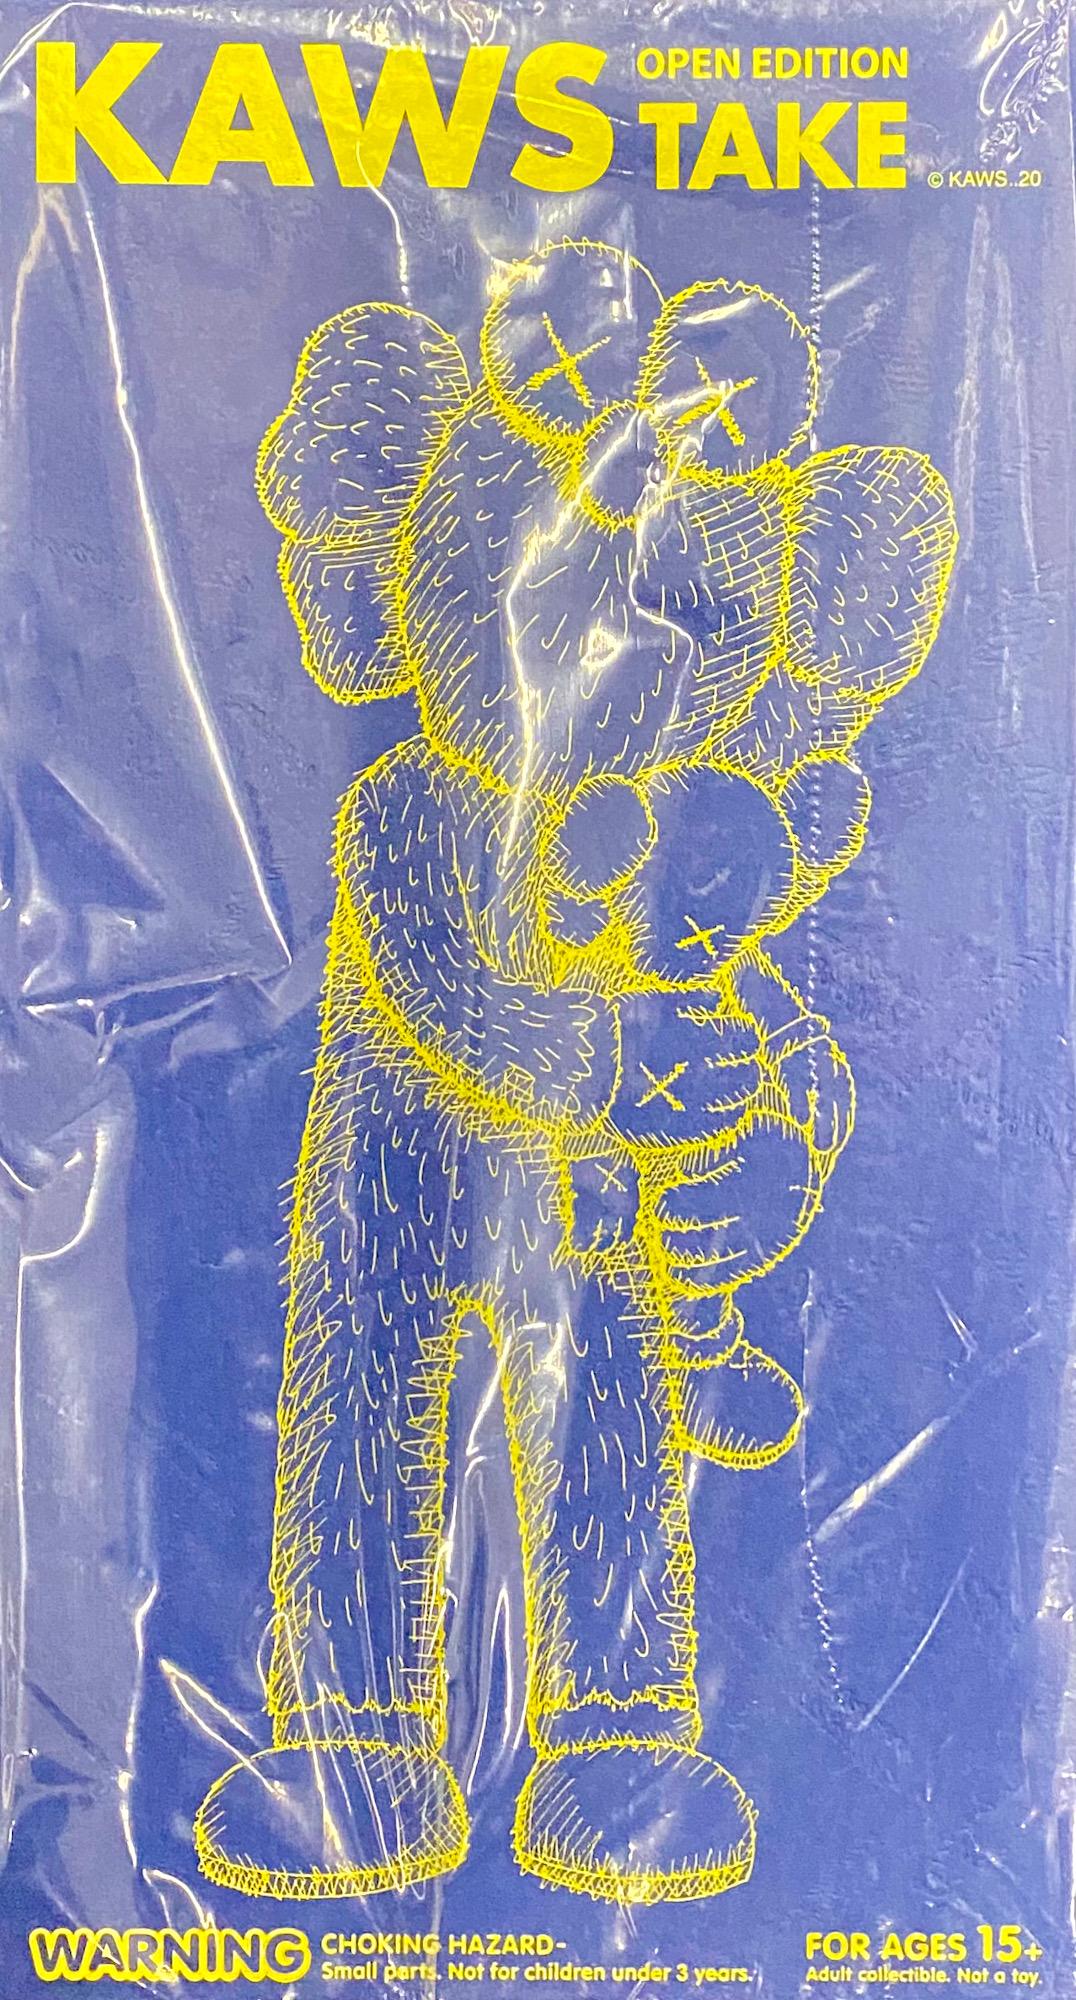 KAWS TAKE (Blue) new & unopened in its original packaging. 

A standout KAWS figurative sculpture and variation of KAWS' large scale TAKE sculpture - a key highlight of the exhibition, 'KAWS BLACKOUT’ at Skarstedt Gallery London in 2019 - the first